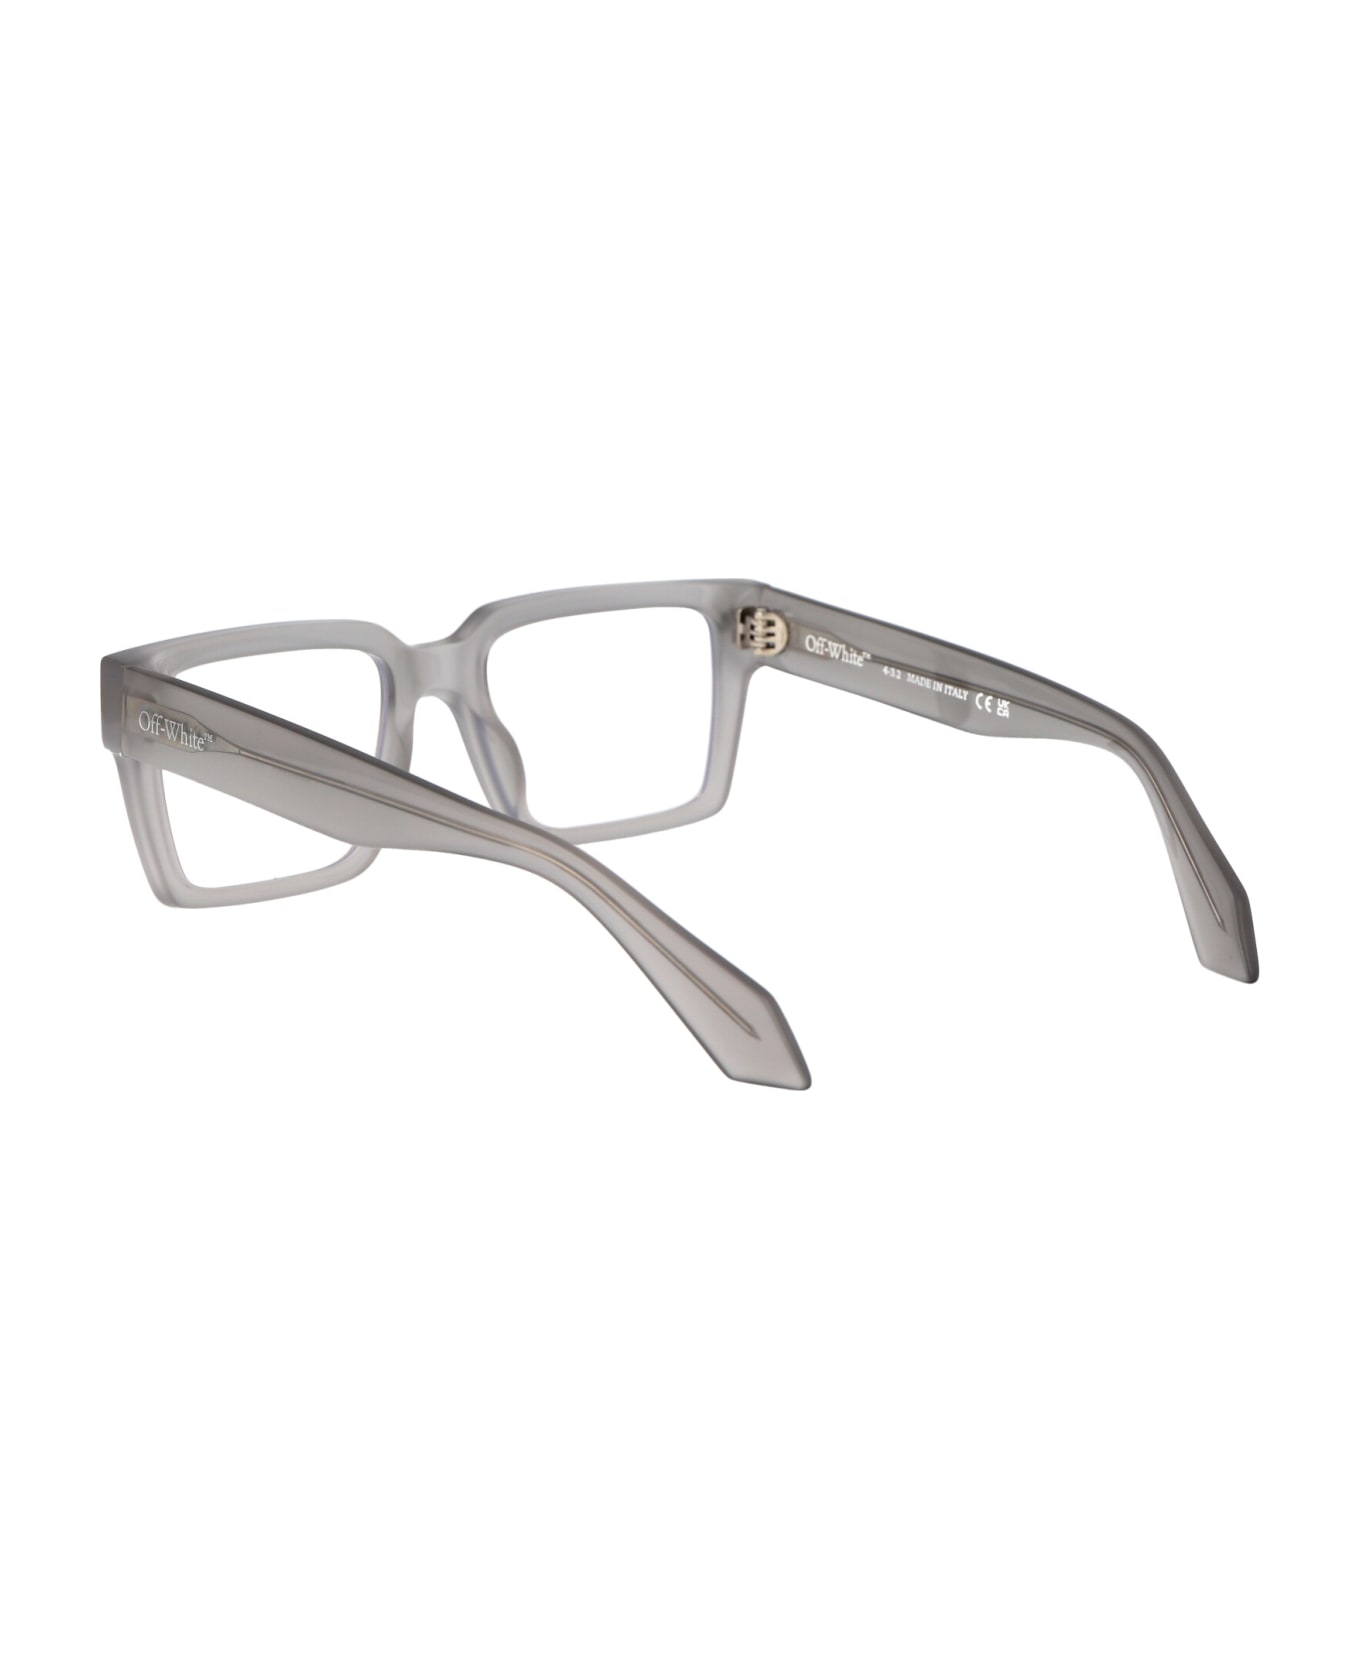 Off-White Optical Style 54 Glasses - 0900 GREY 